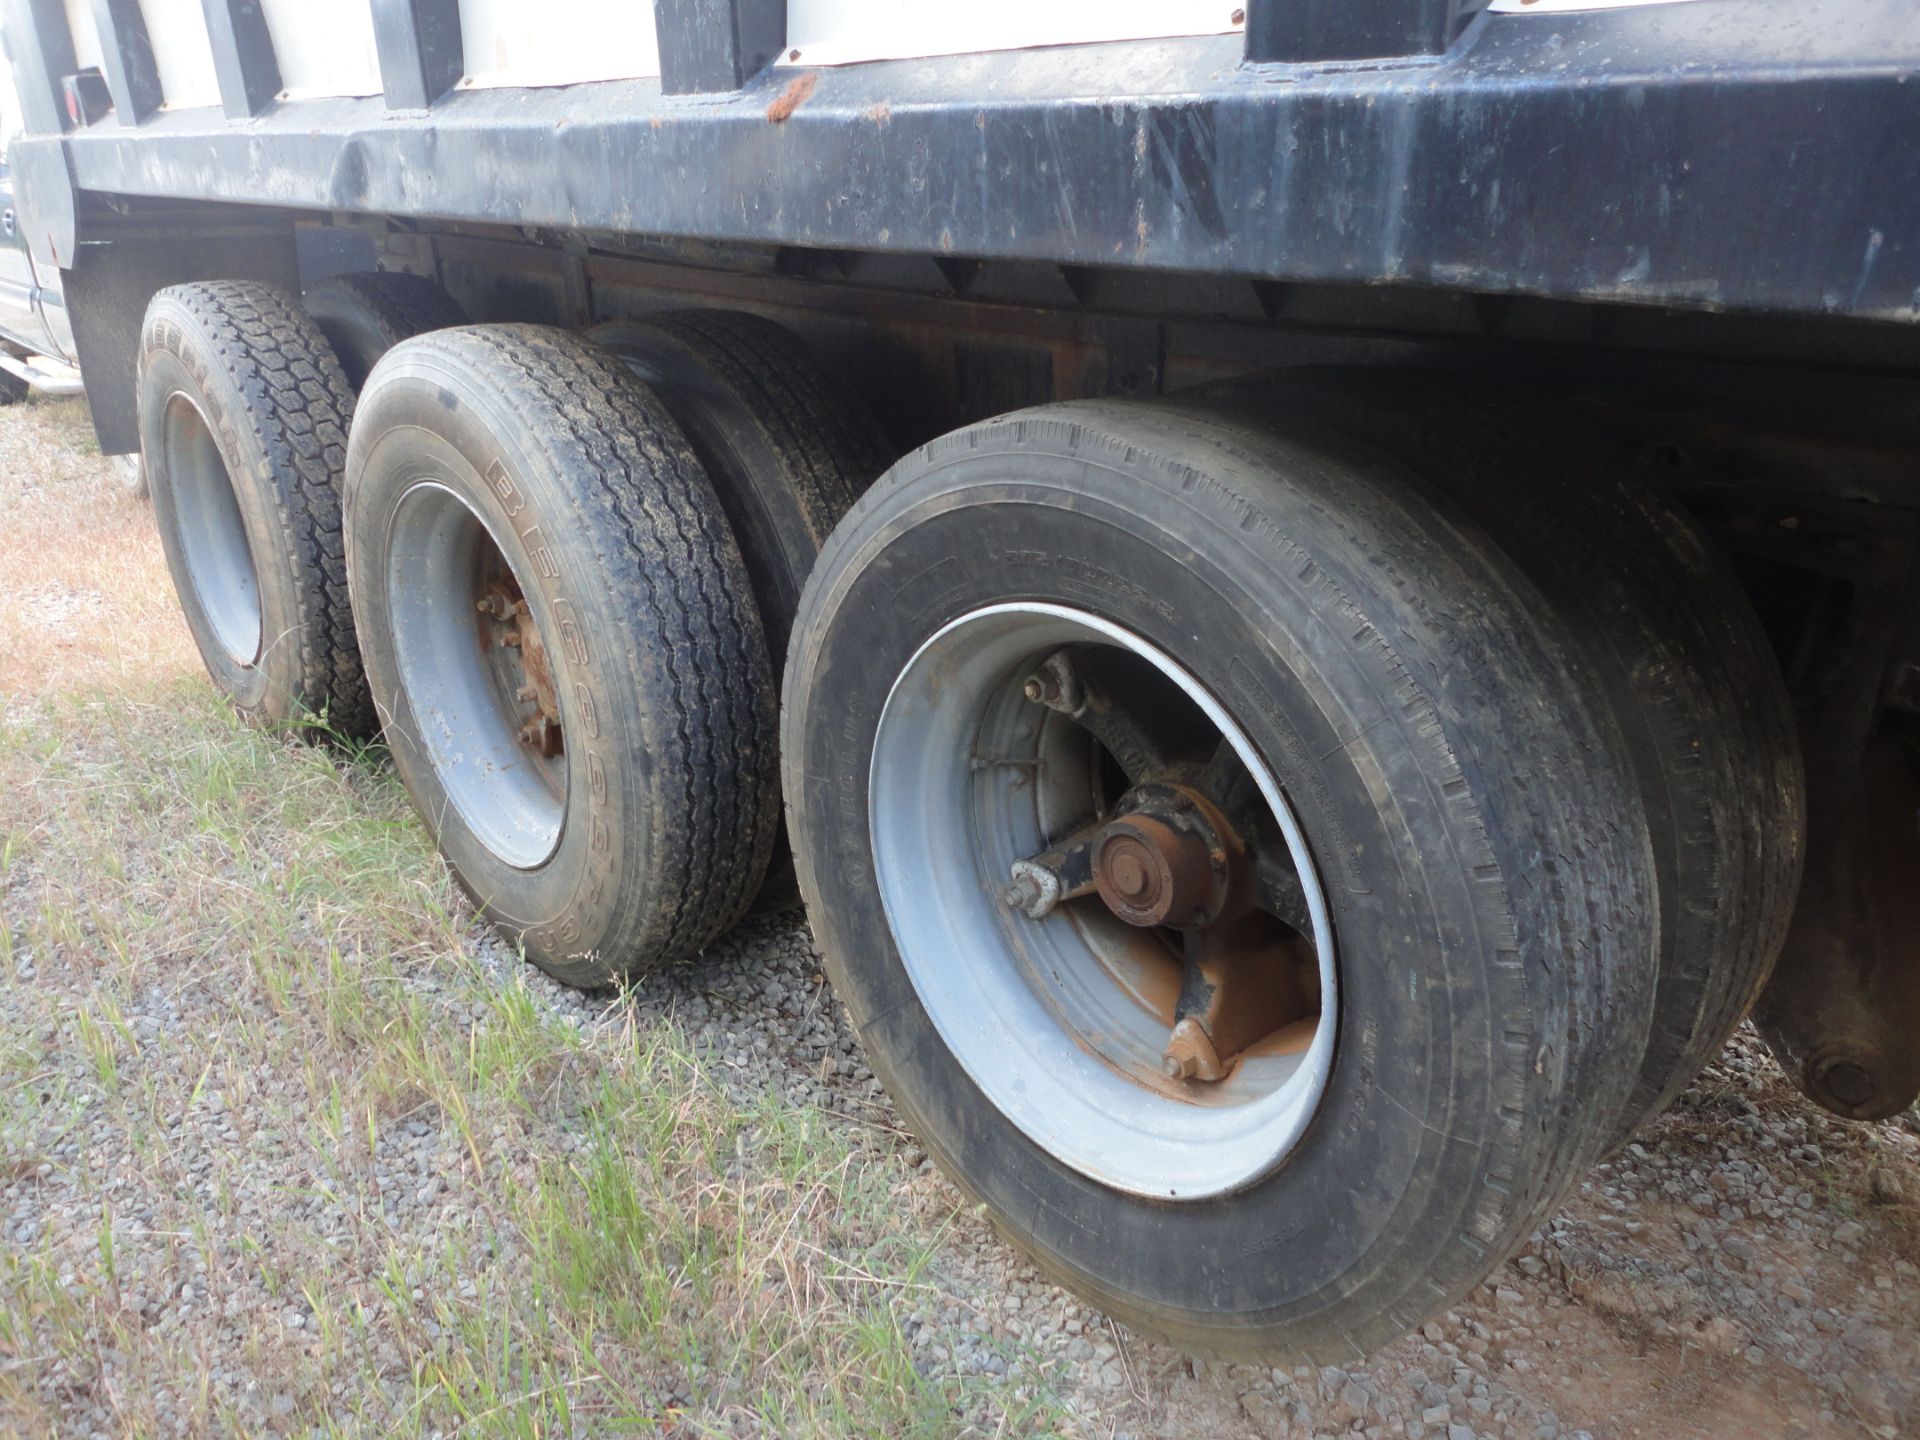 1990 MACK MODEL RD690S TANDEM AXLE AIR CONTROL TAG AXLE, 16' STEEL DUMP BED DUMP TRUCK; W/ POWER - Image 3 of 13